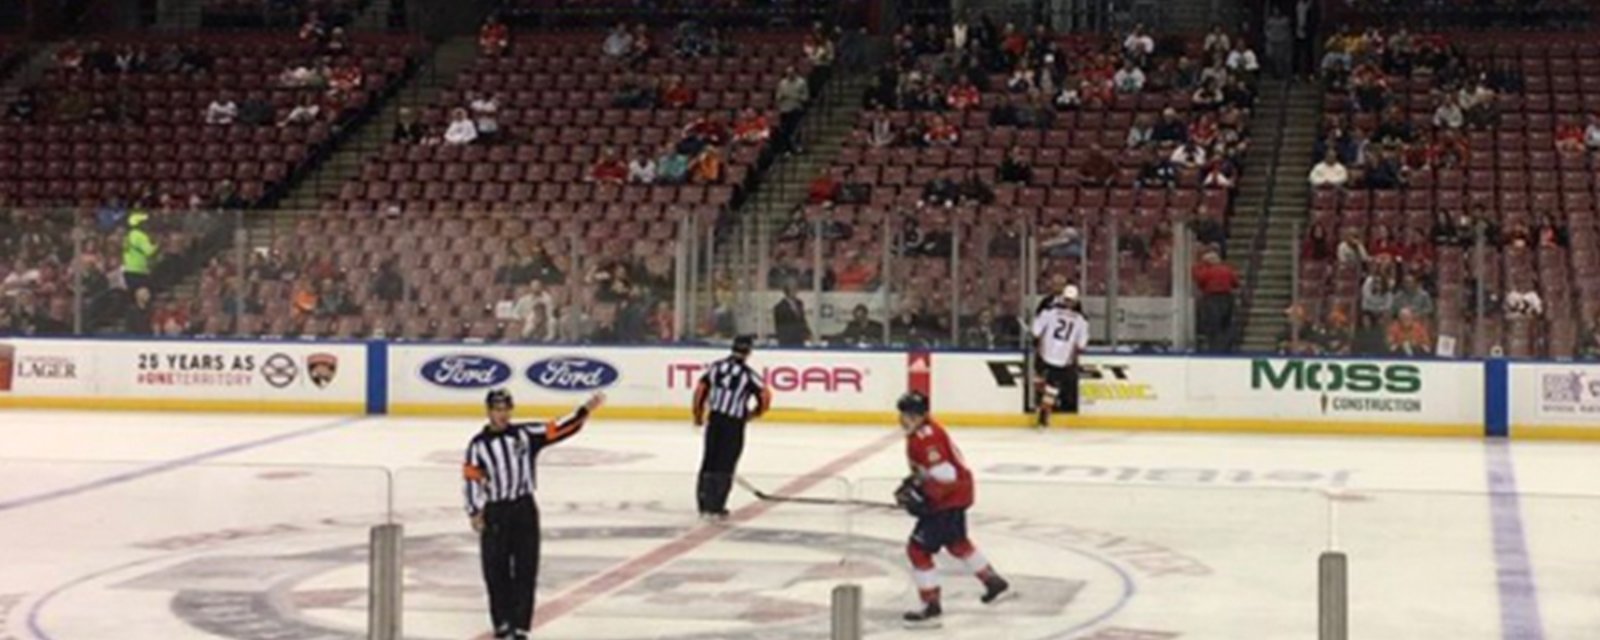 Panthers set embarrassing new low in attendance for game against Ducks